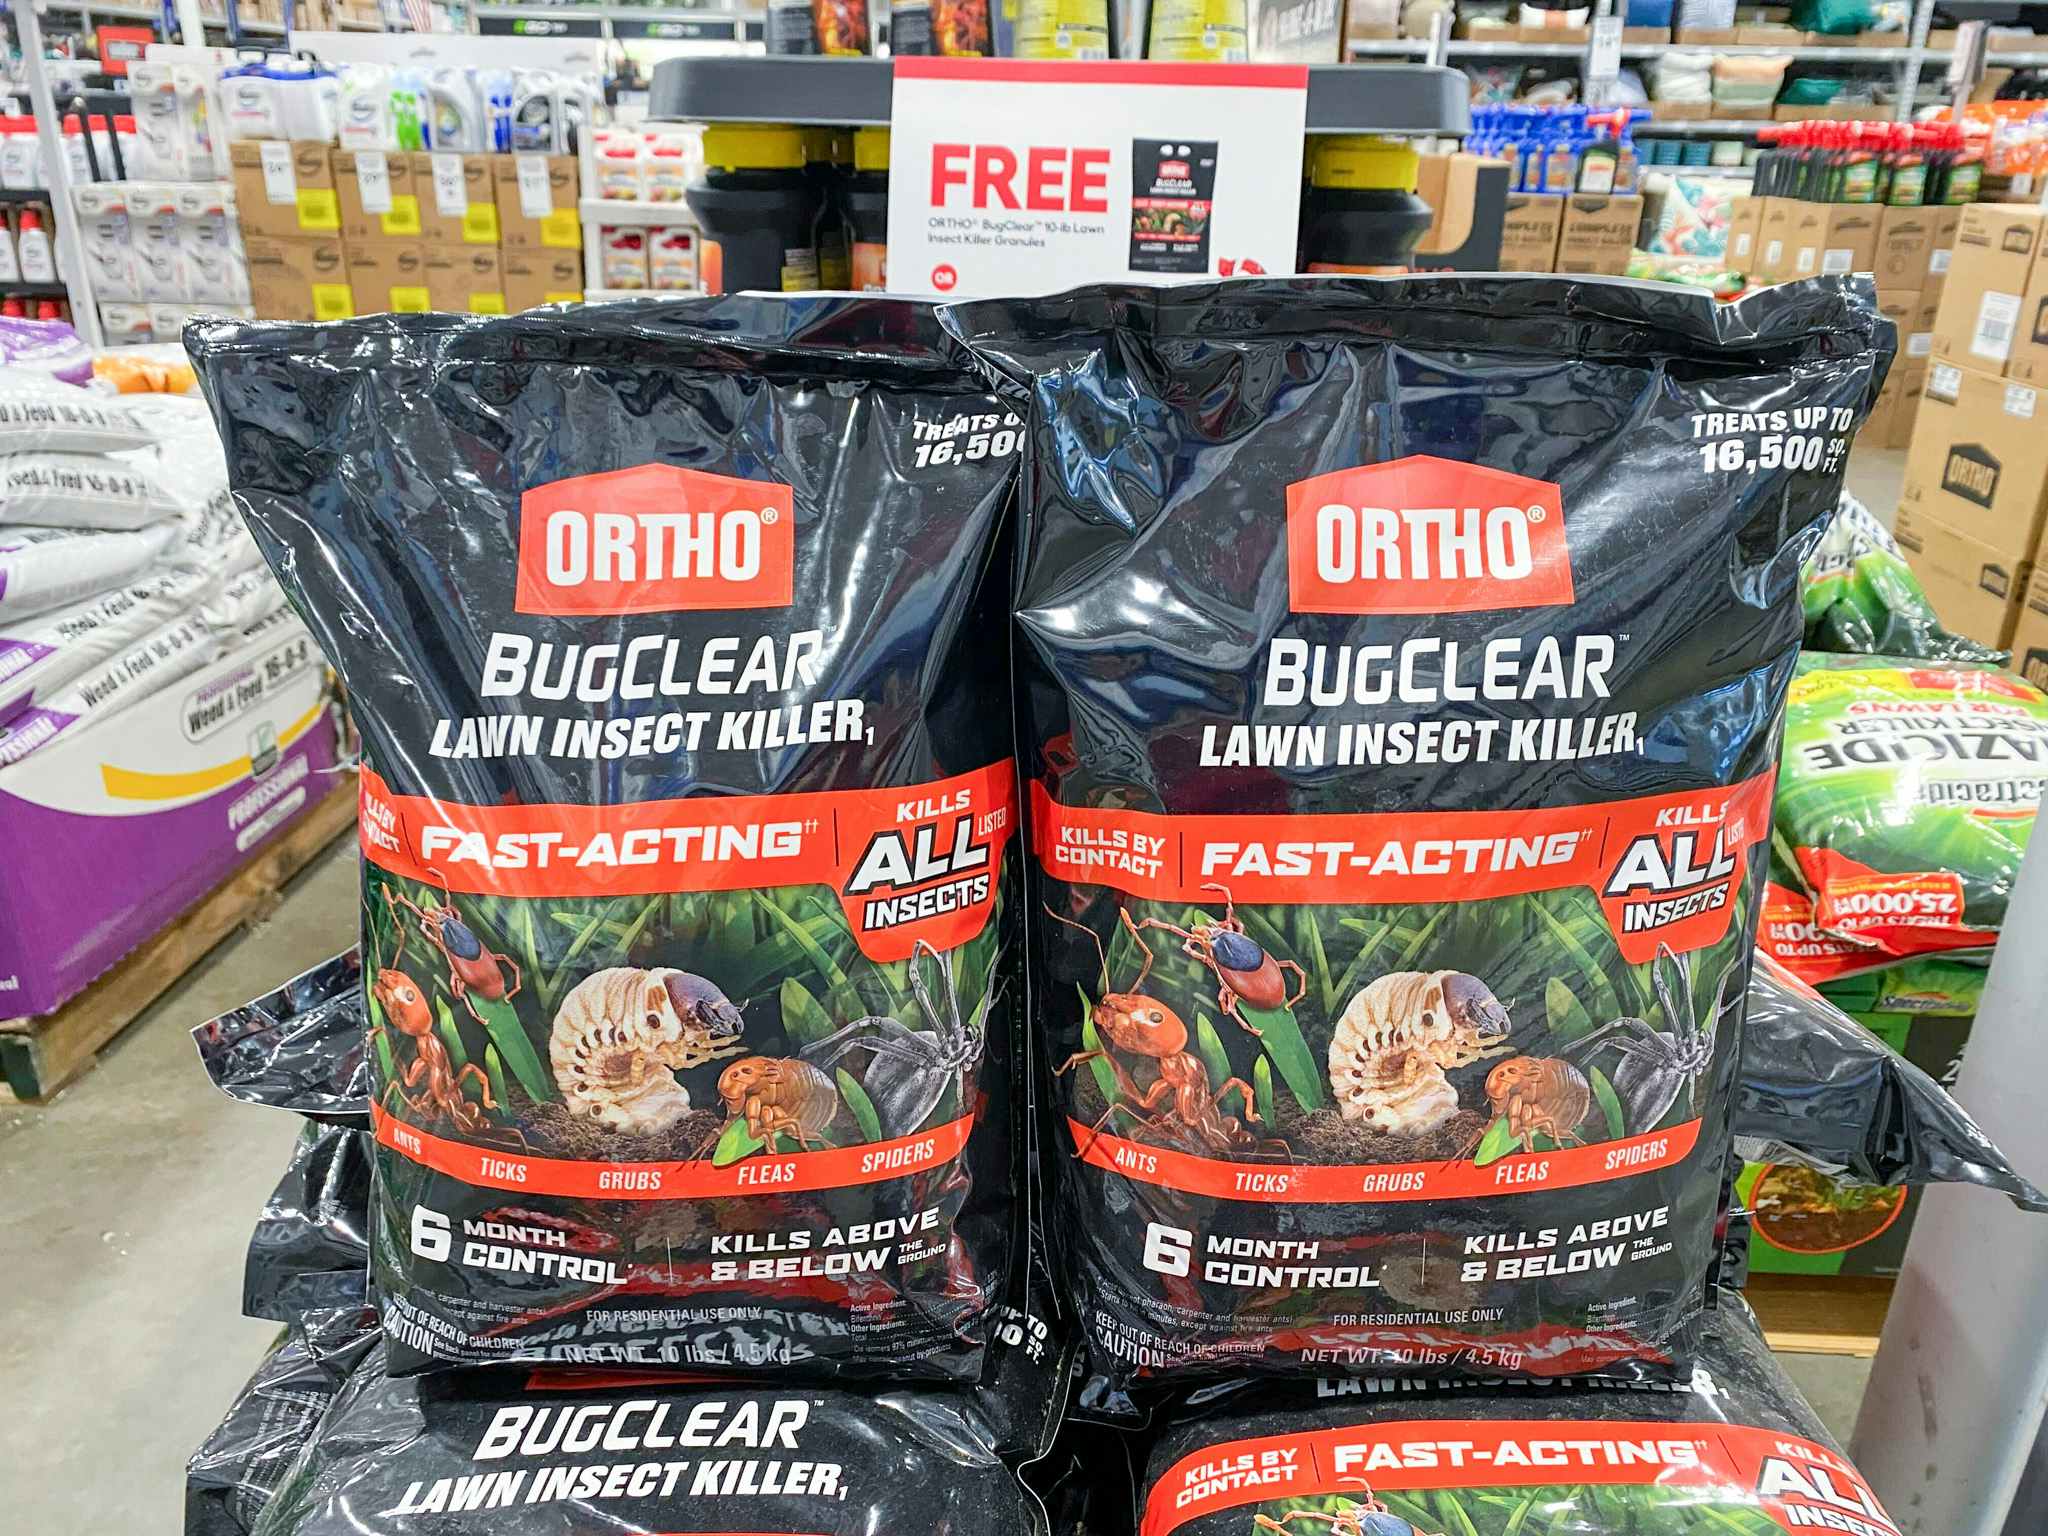 bags of ortho bugclear lawn insect killer